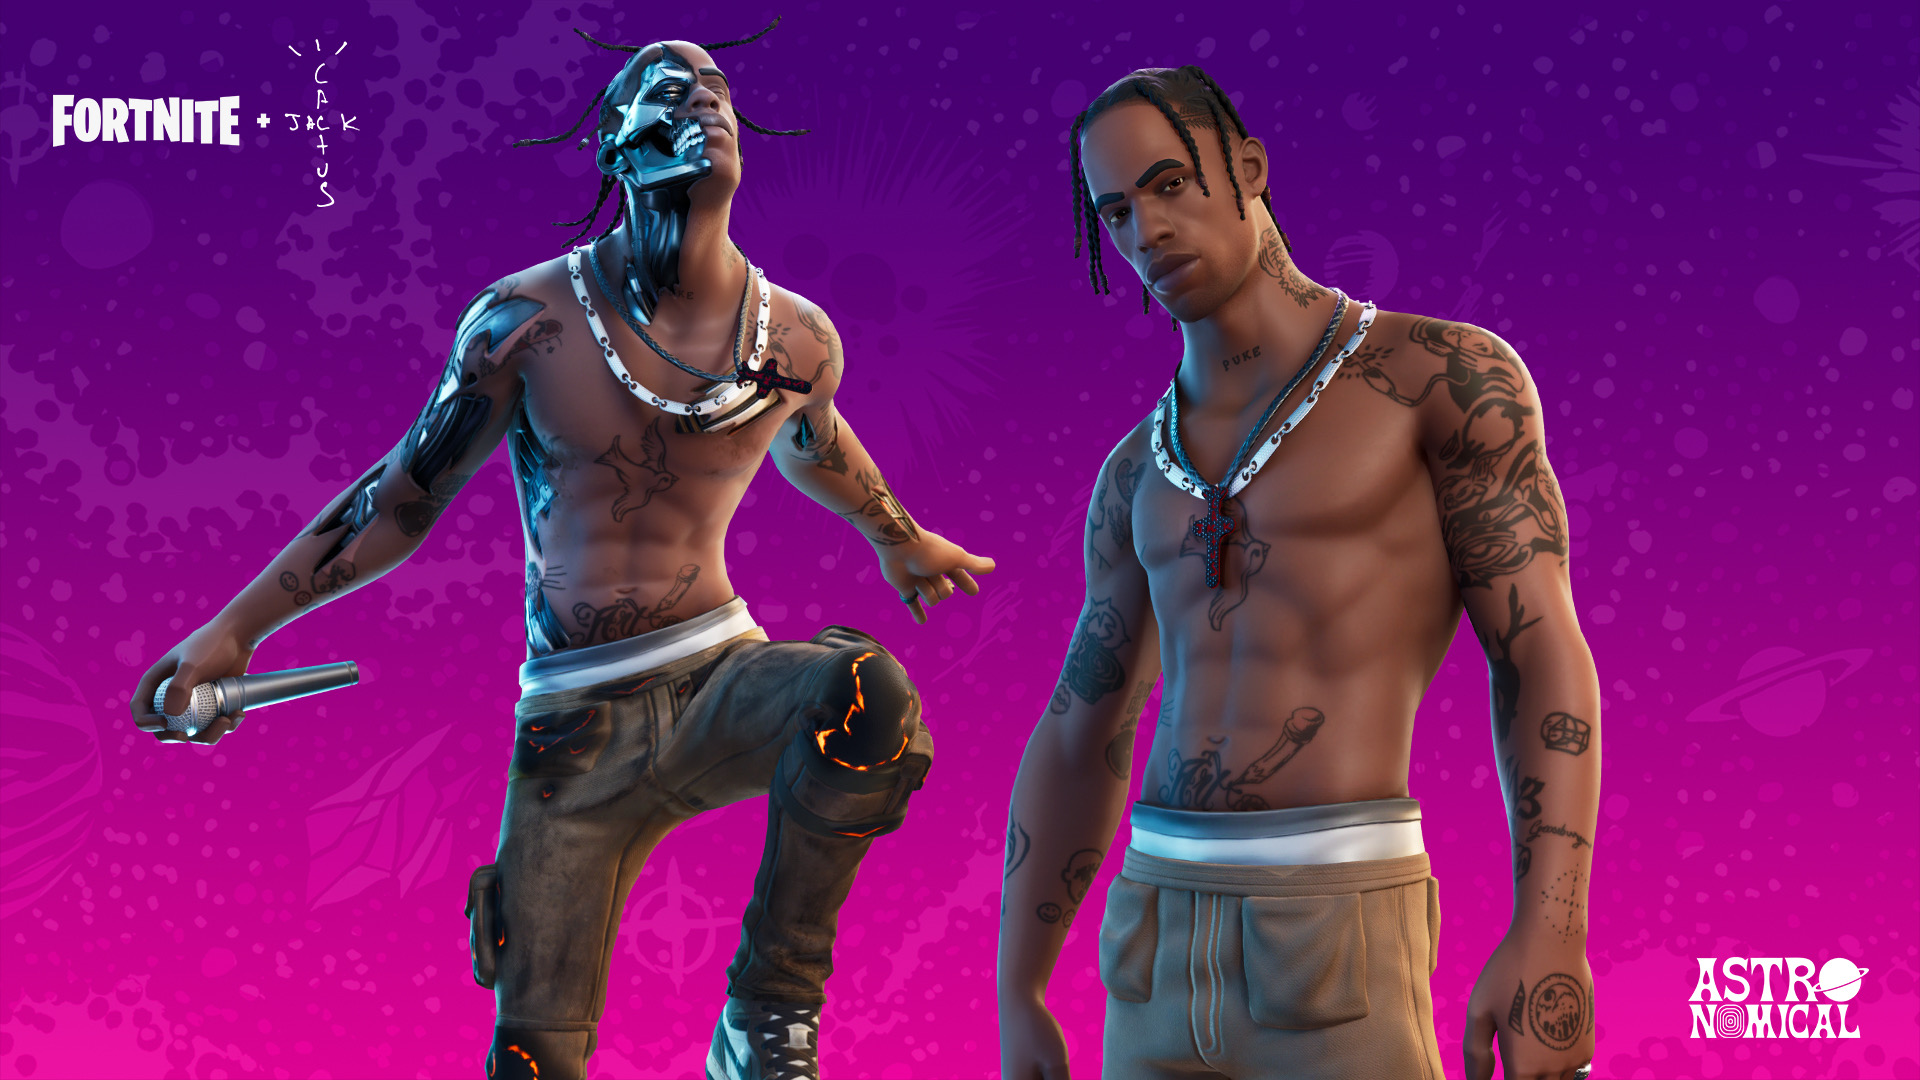 Over 12M Gamers Tuned in to Watch Travis Scott Get 'Astronomical' on Fortnite